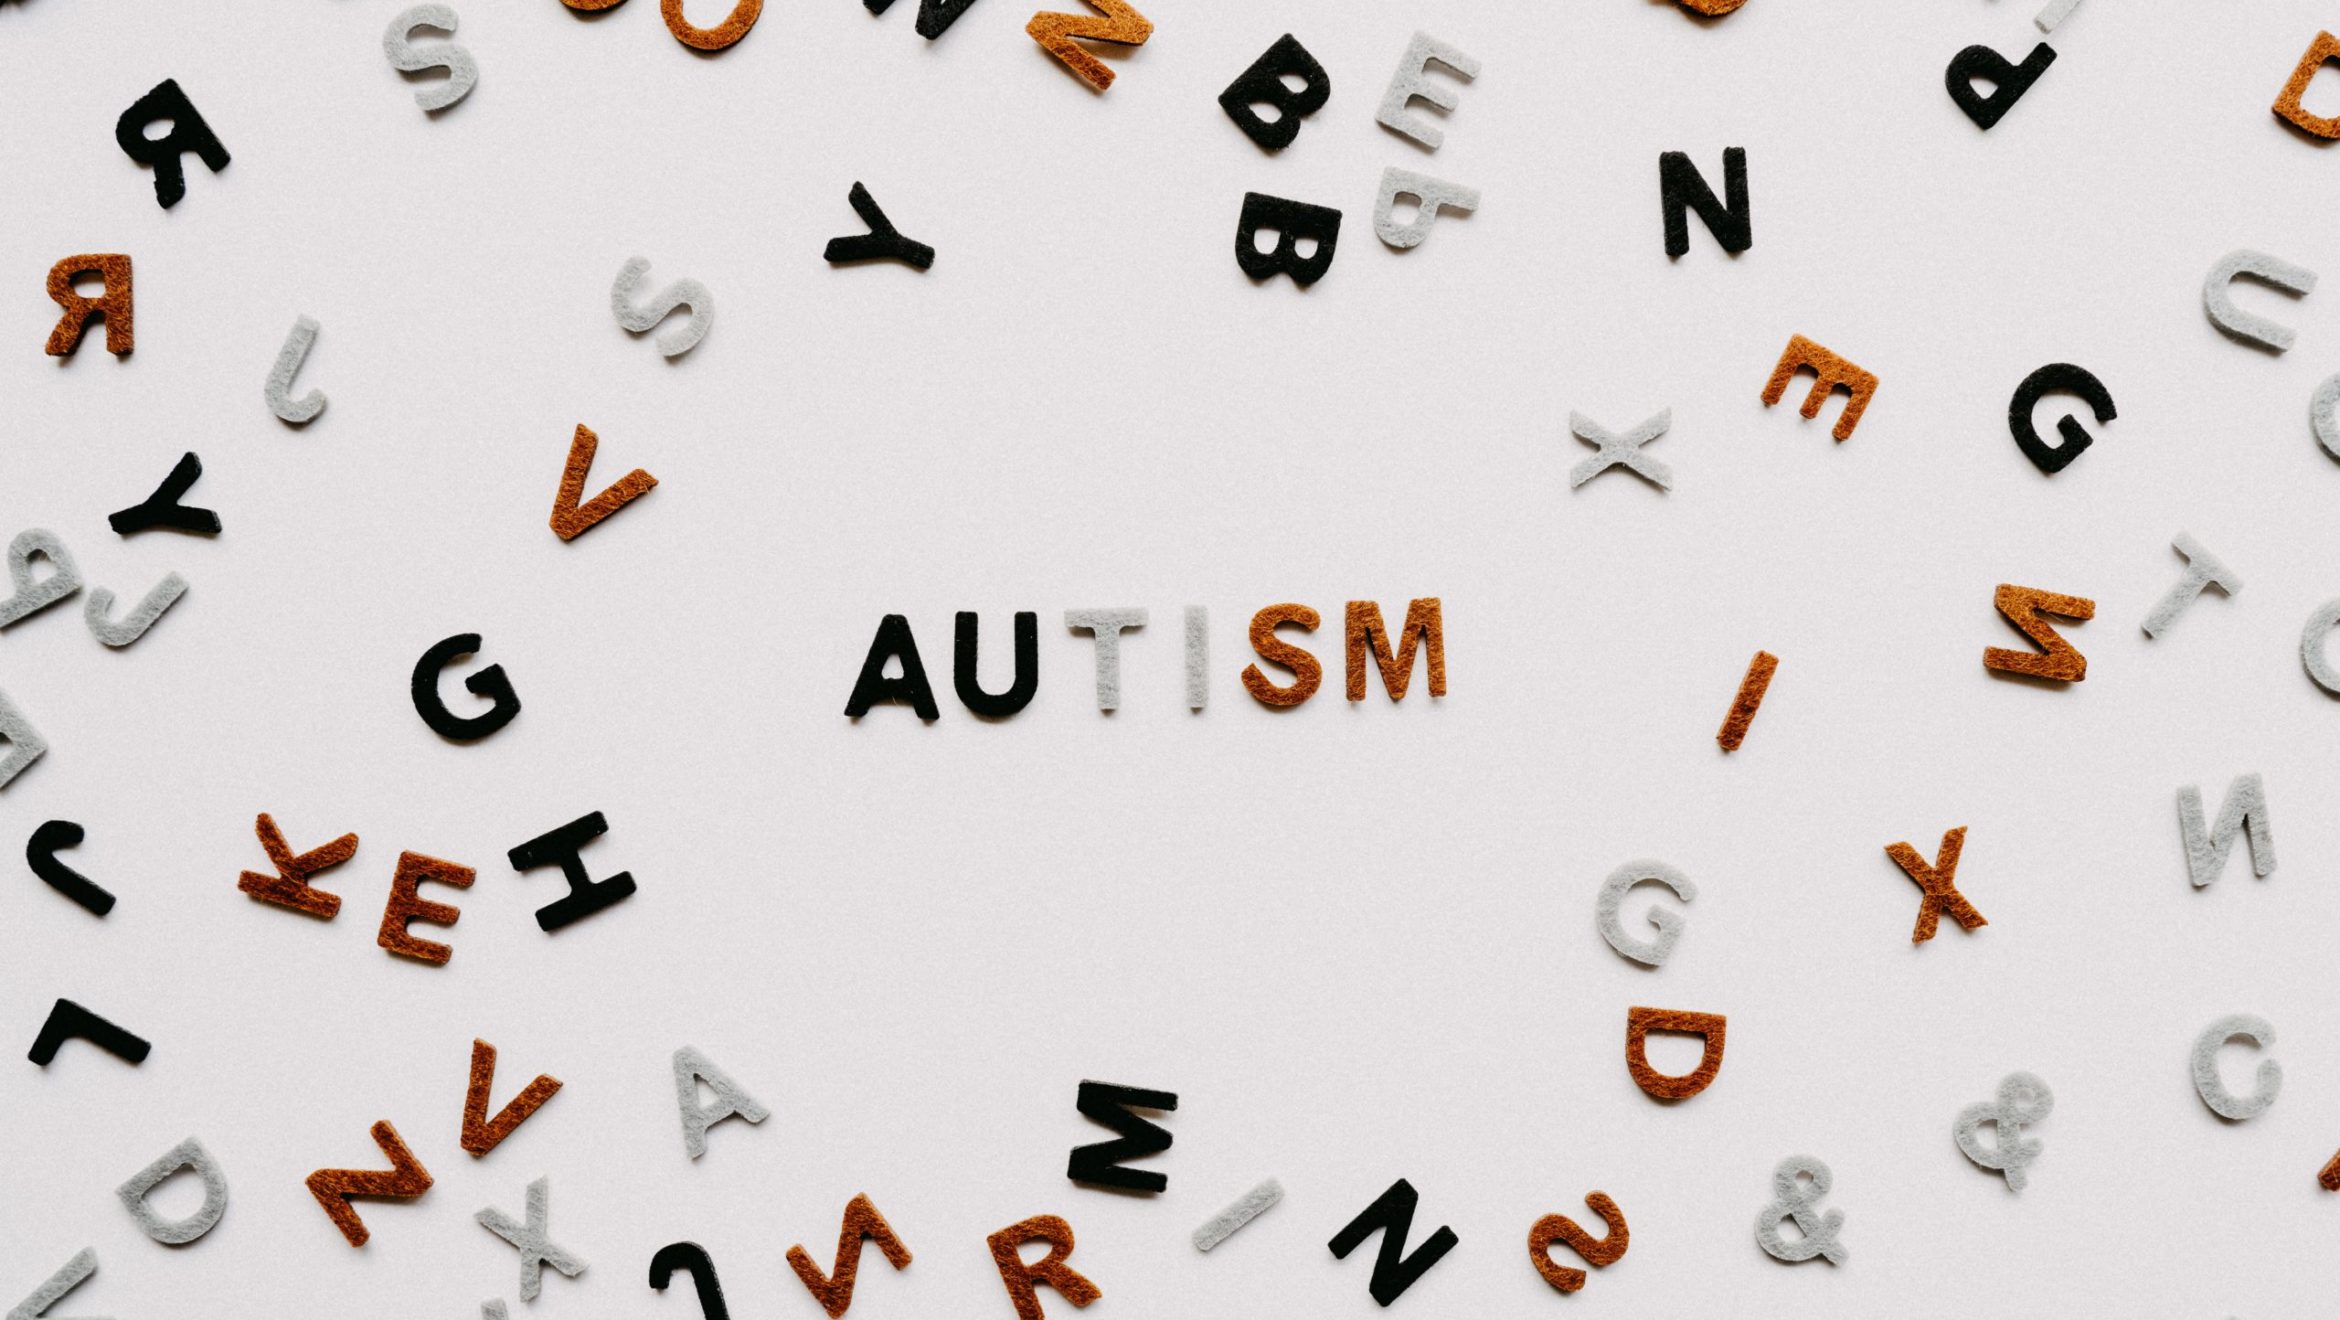 Autism and Eating Disorders